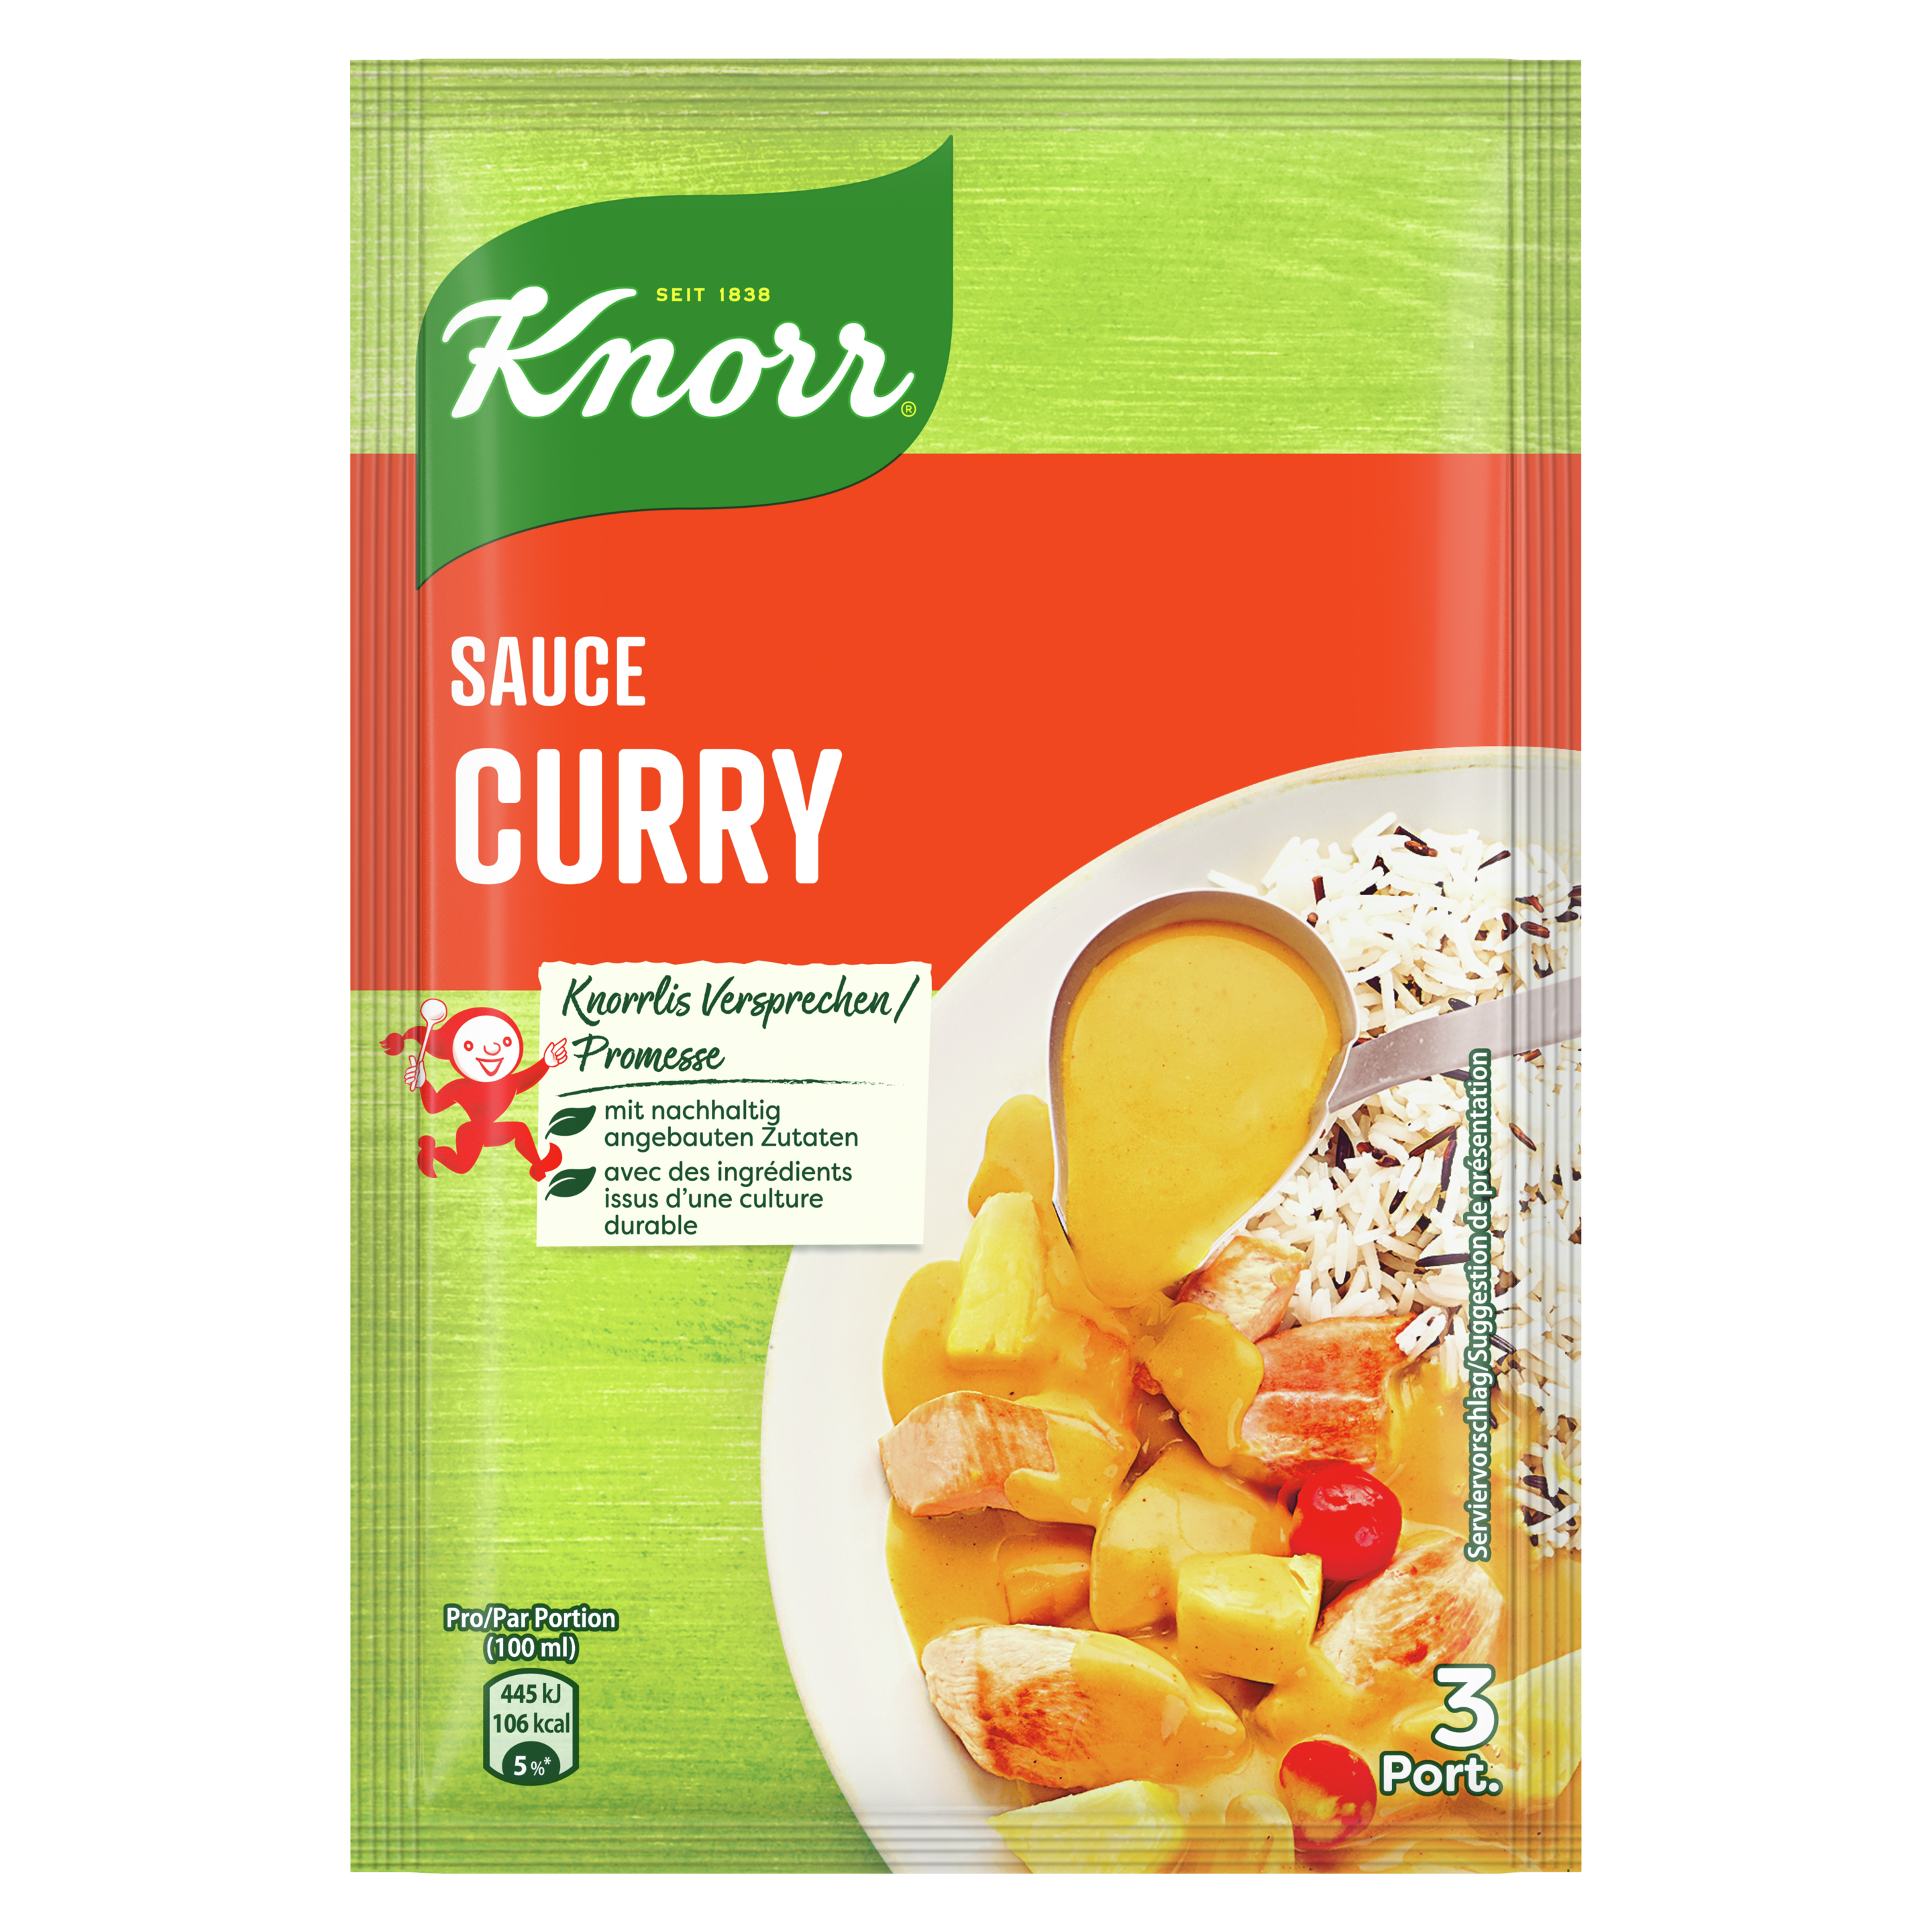 KNORR Sauce curry sachet 3 portions